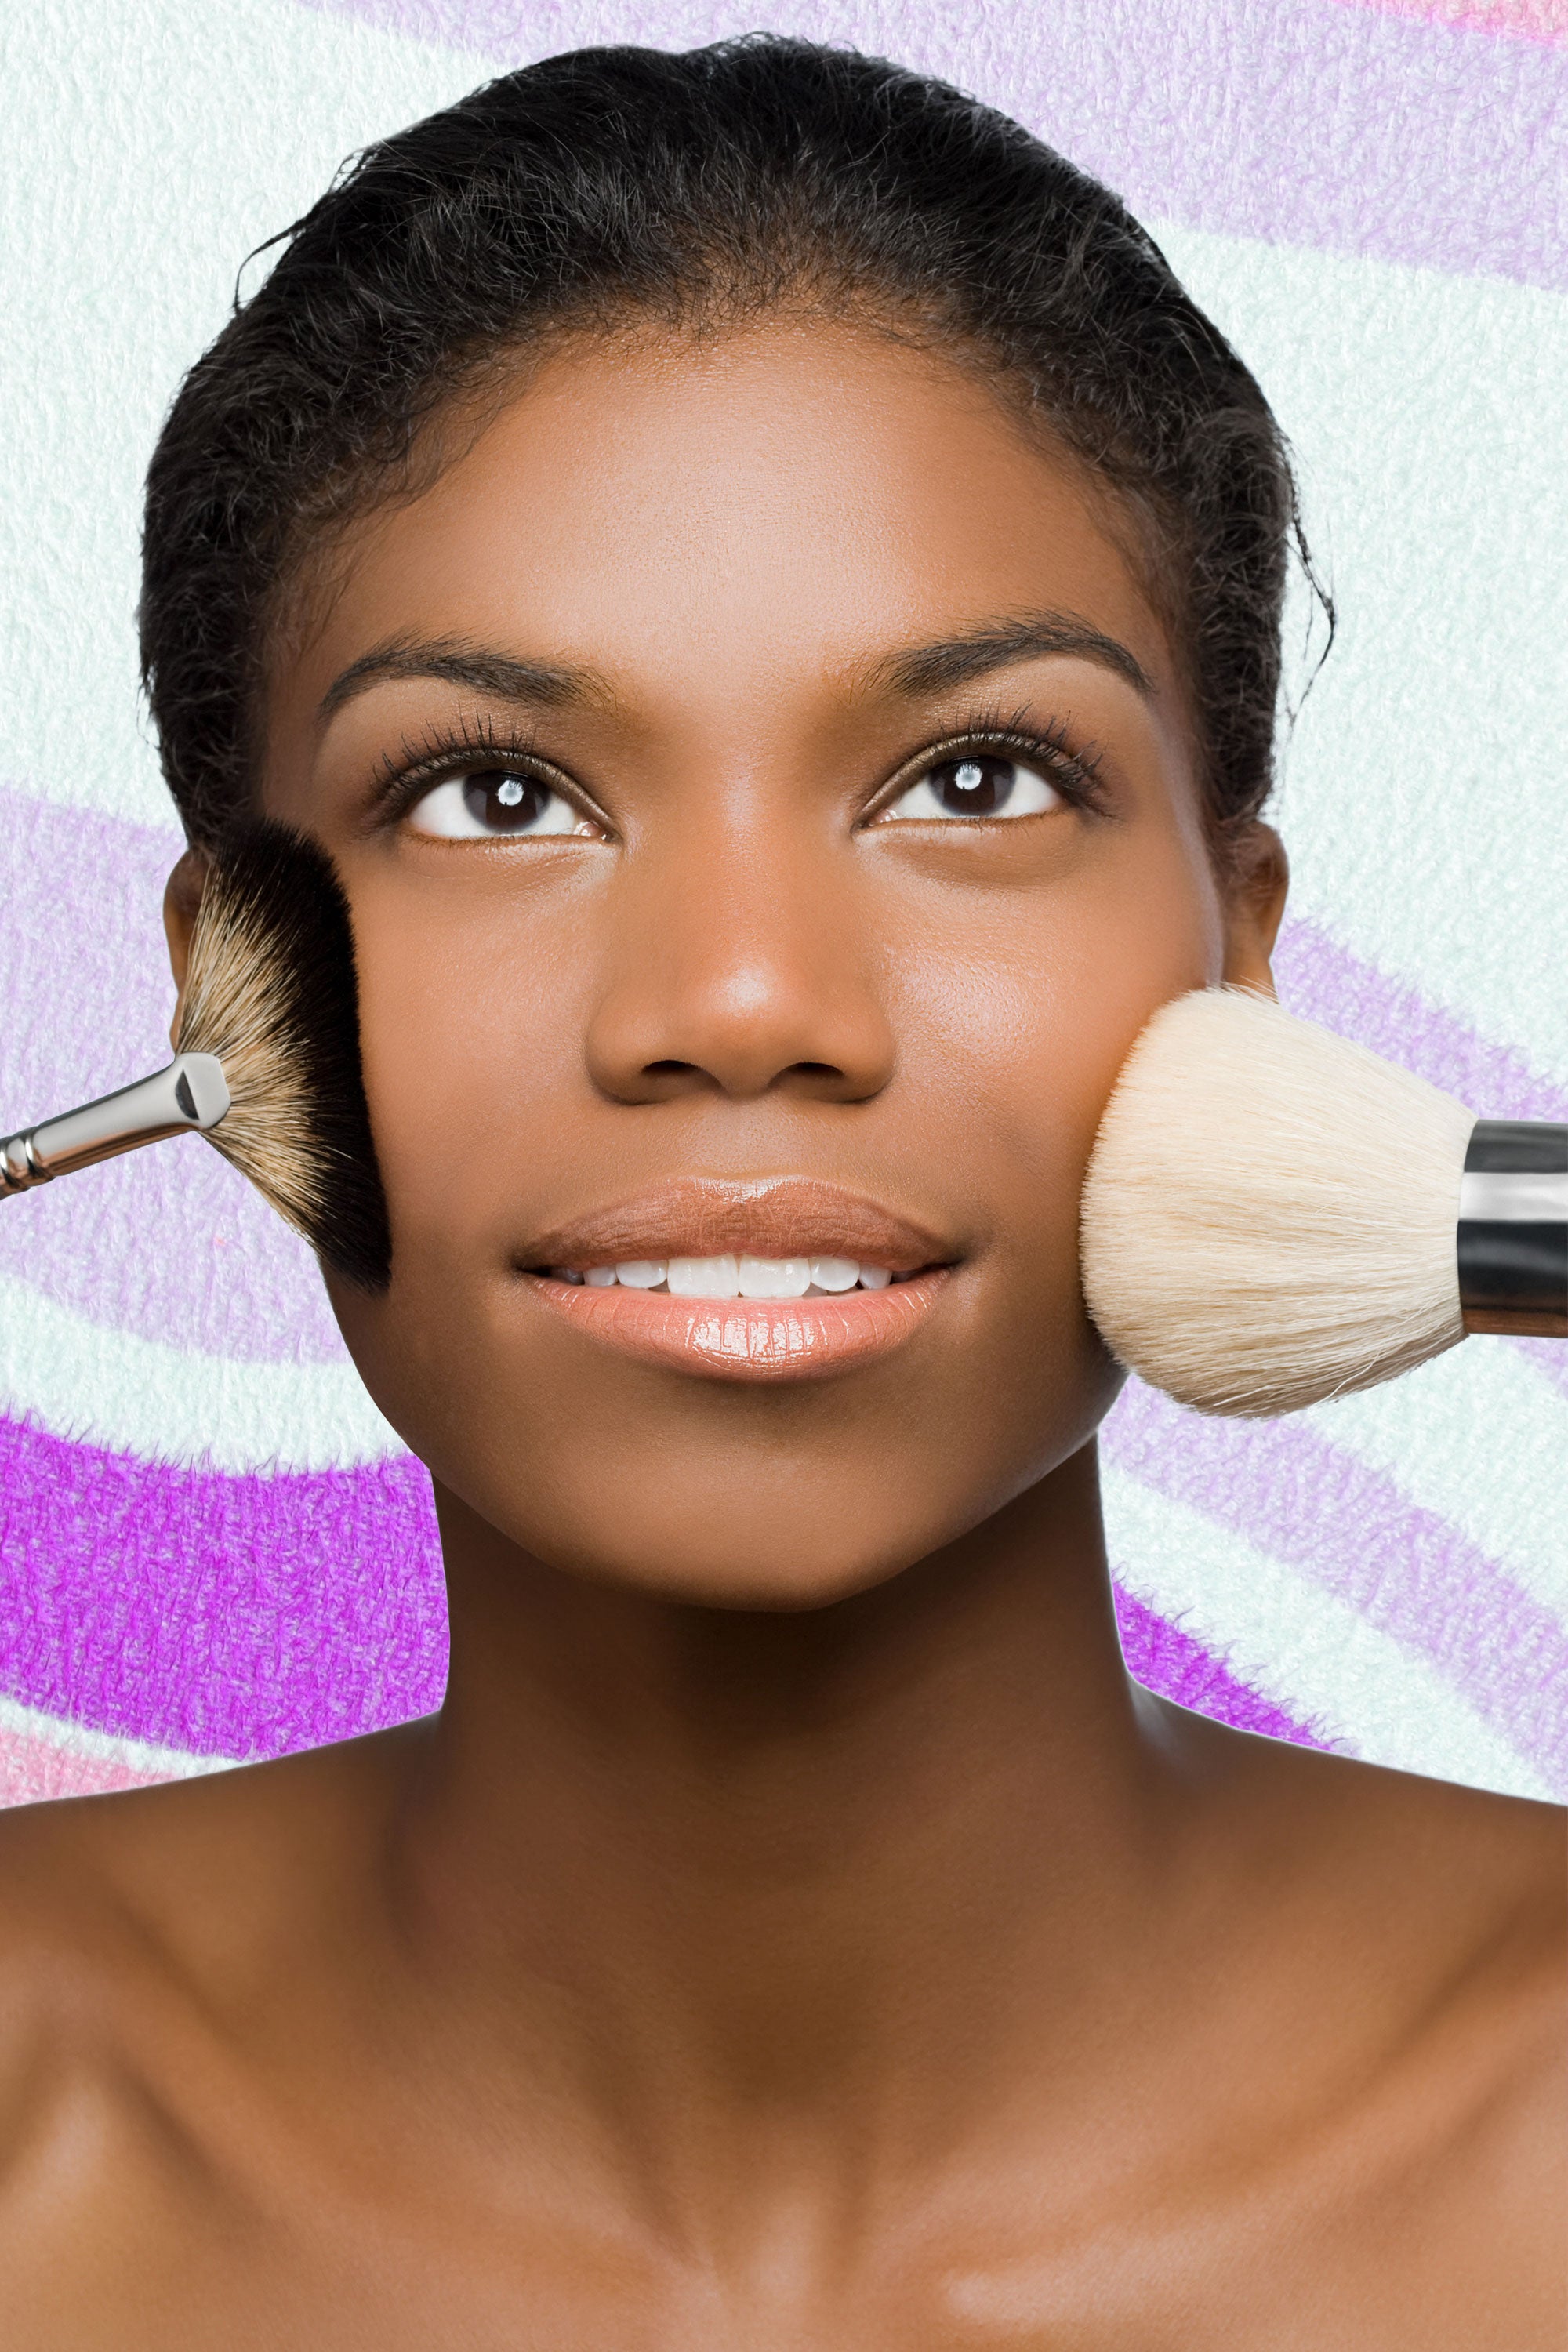 7 Foundations That Cover Dark Spots Like A Boss